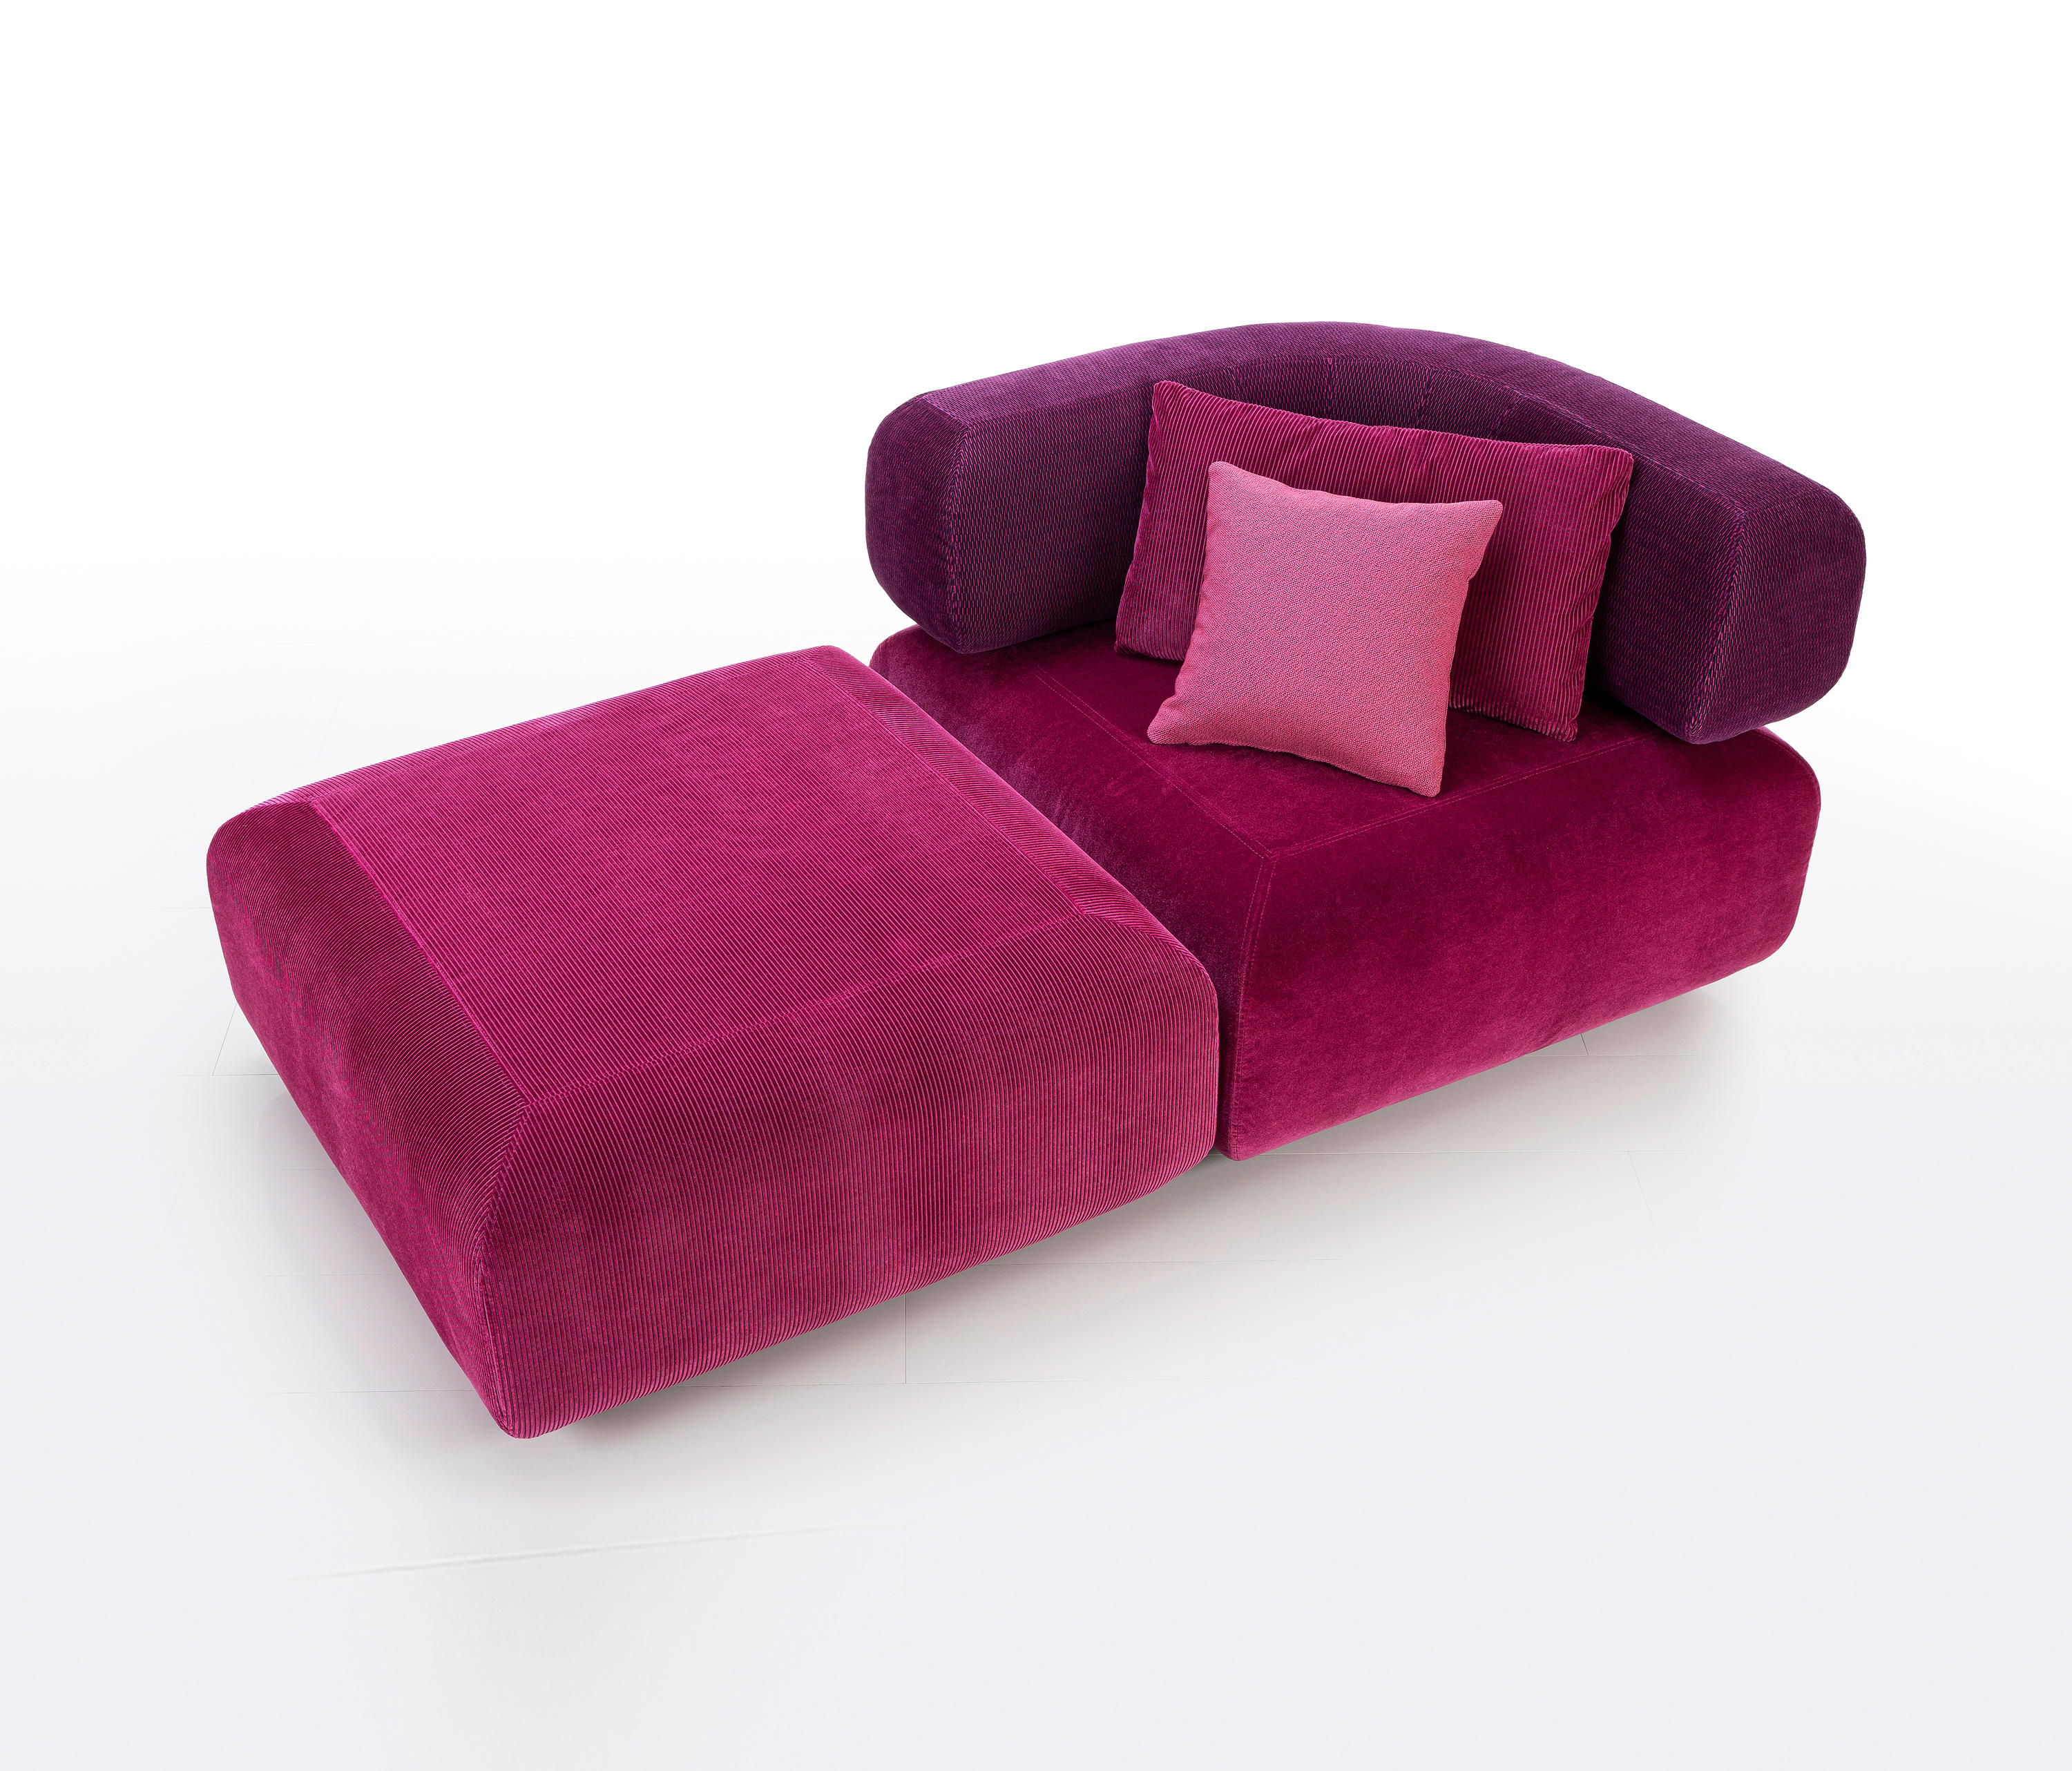 ALL TOGETHER - Sofas from Brühl | Architonic